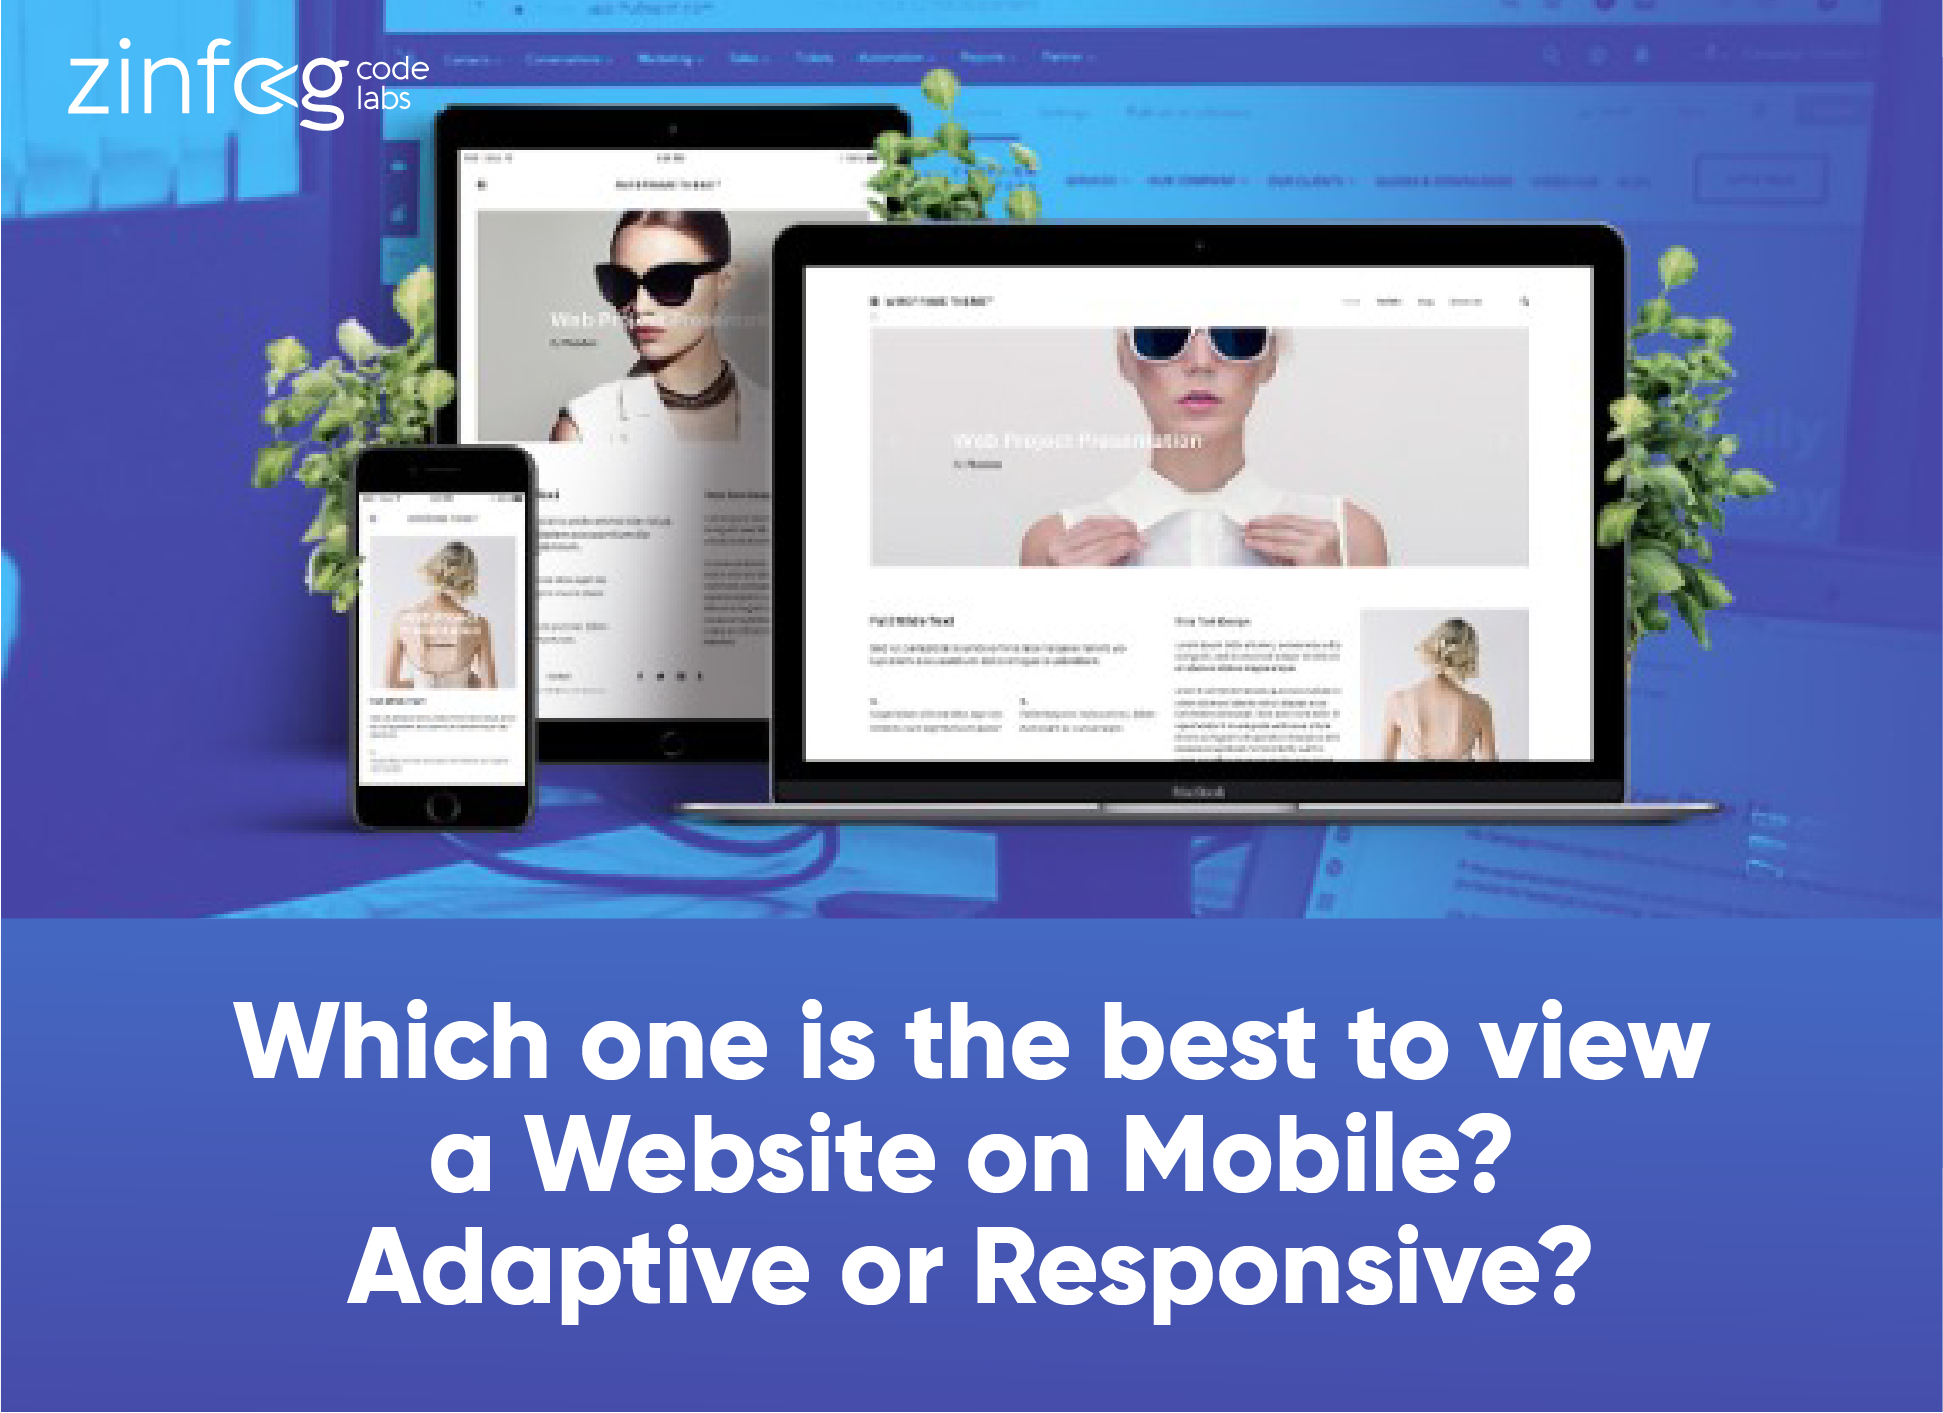 which_one_is_the_best_to_view_a_website_on_mobile_adaptive_or_responsive.html